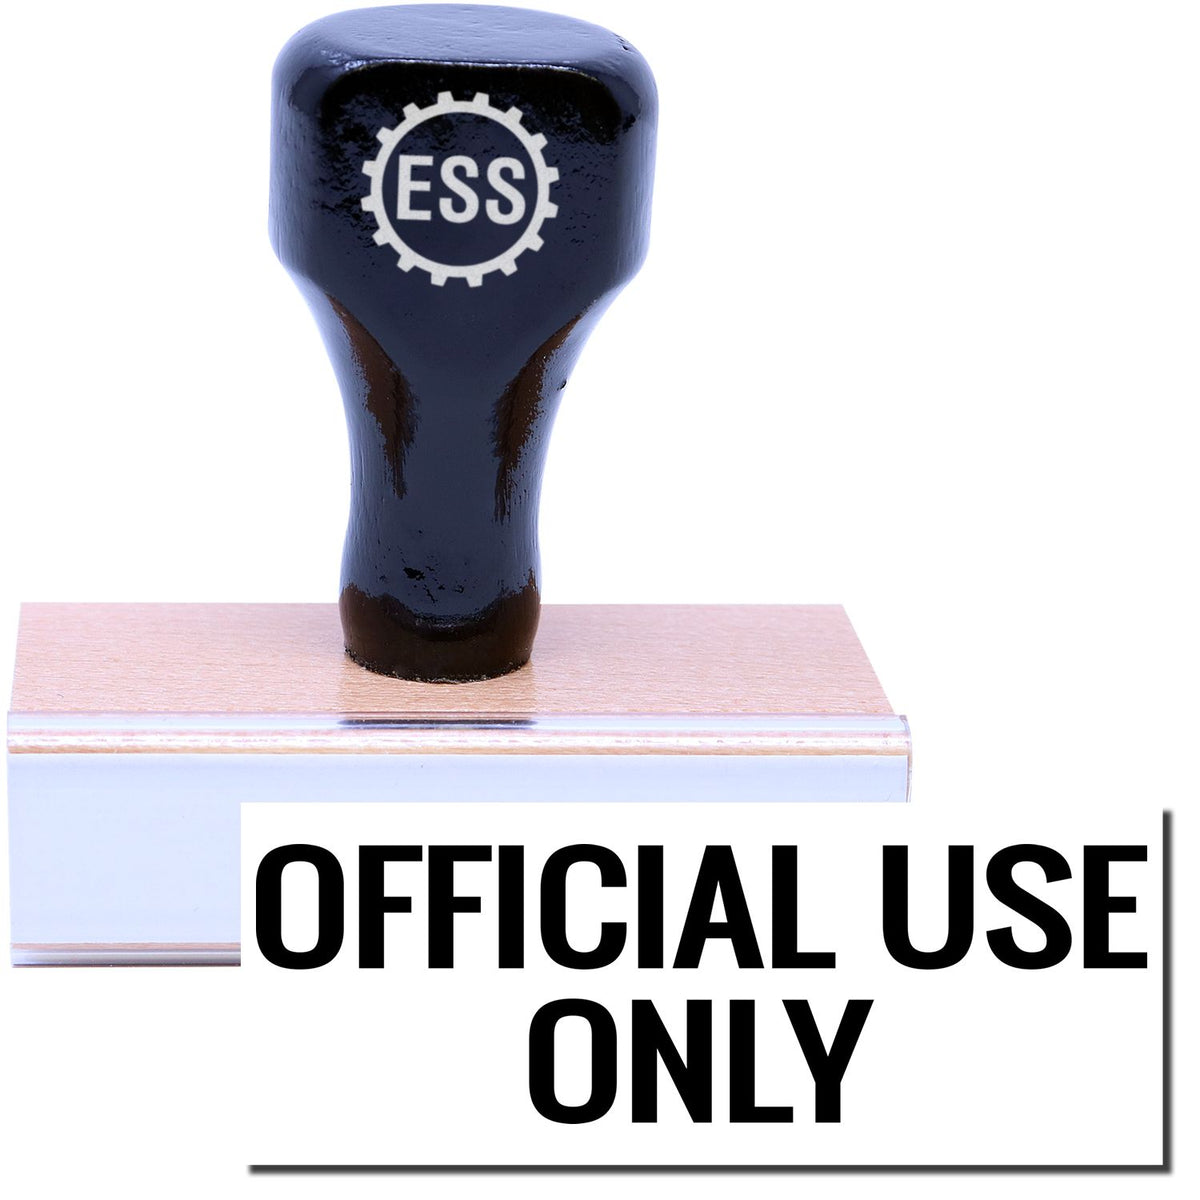 A stock office rubber stamp with a stamped image showing how the text &quot;OFFICIAL USE ONLY&quot; is displayed after stamping.